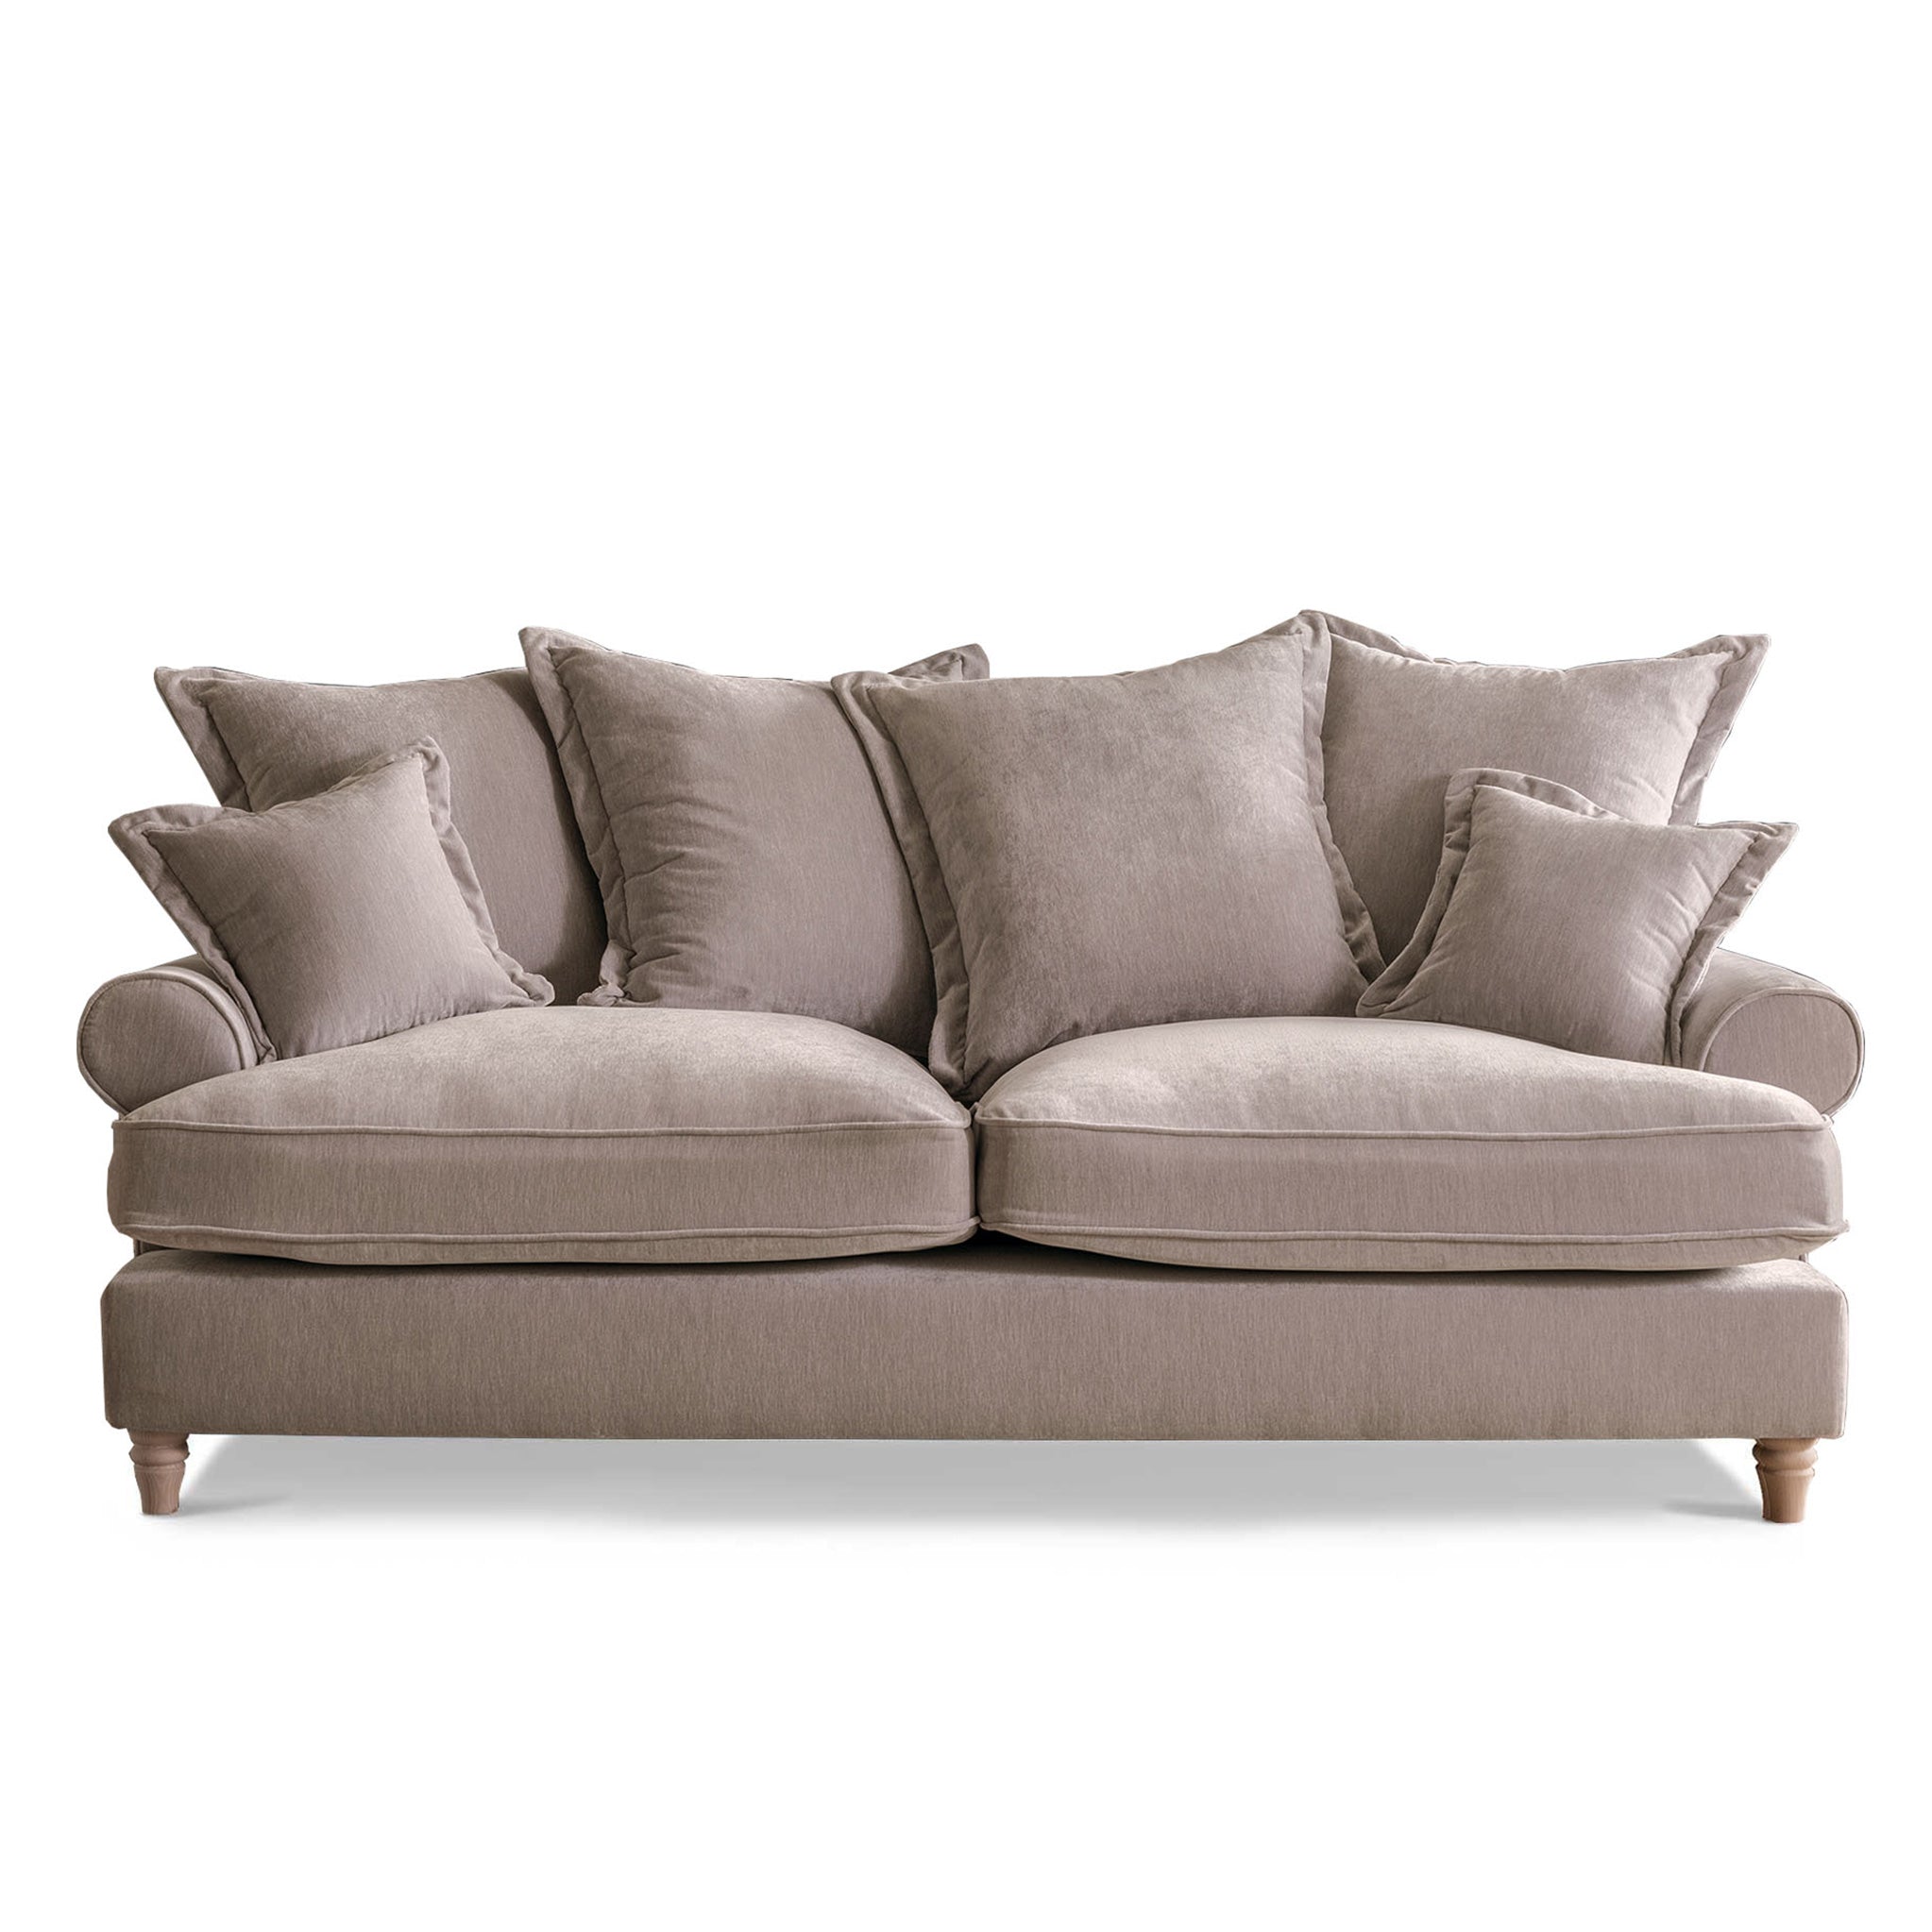 Riley Pillow Back 3 Seater Sofa 8 Colours Made In Uk Roseland